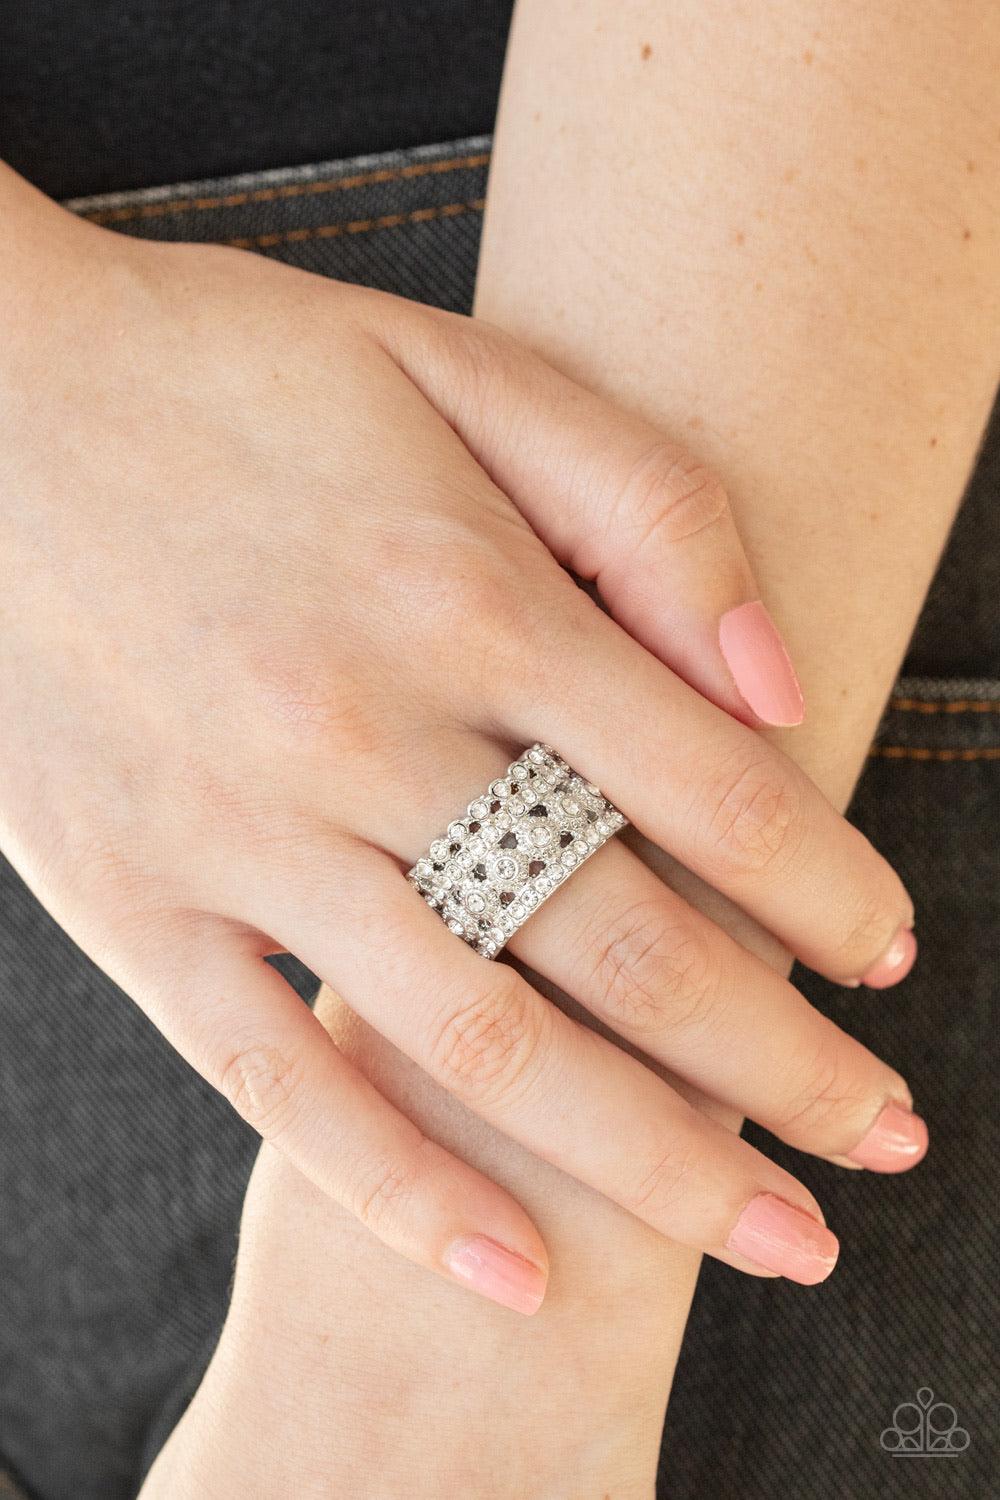 Paparazzi Accessories Countess Couture - White Mismatched bands of glassy white rhinestones layer across the finger, coalescing into a glitzy stacked band. Features a stretchy band for flexible fit. Sold as one individual ring. Jewelry